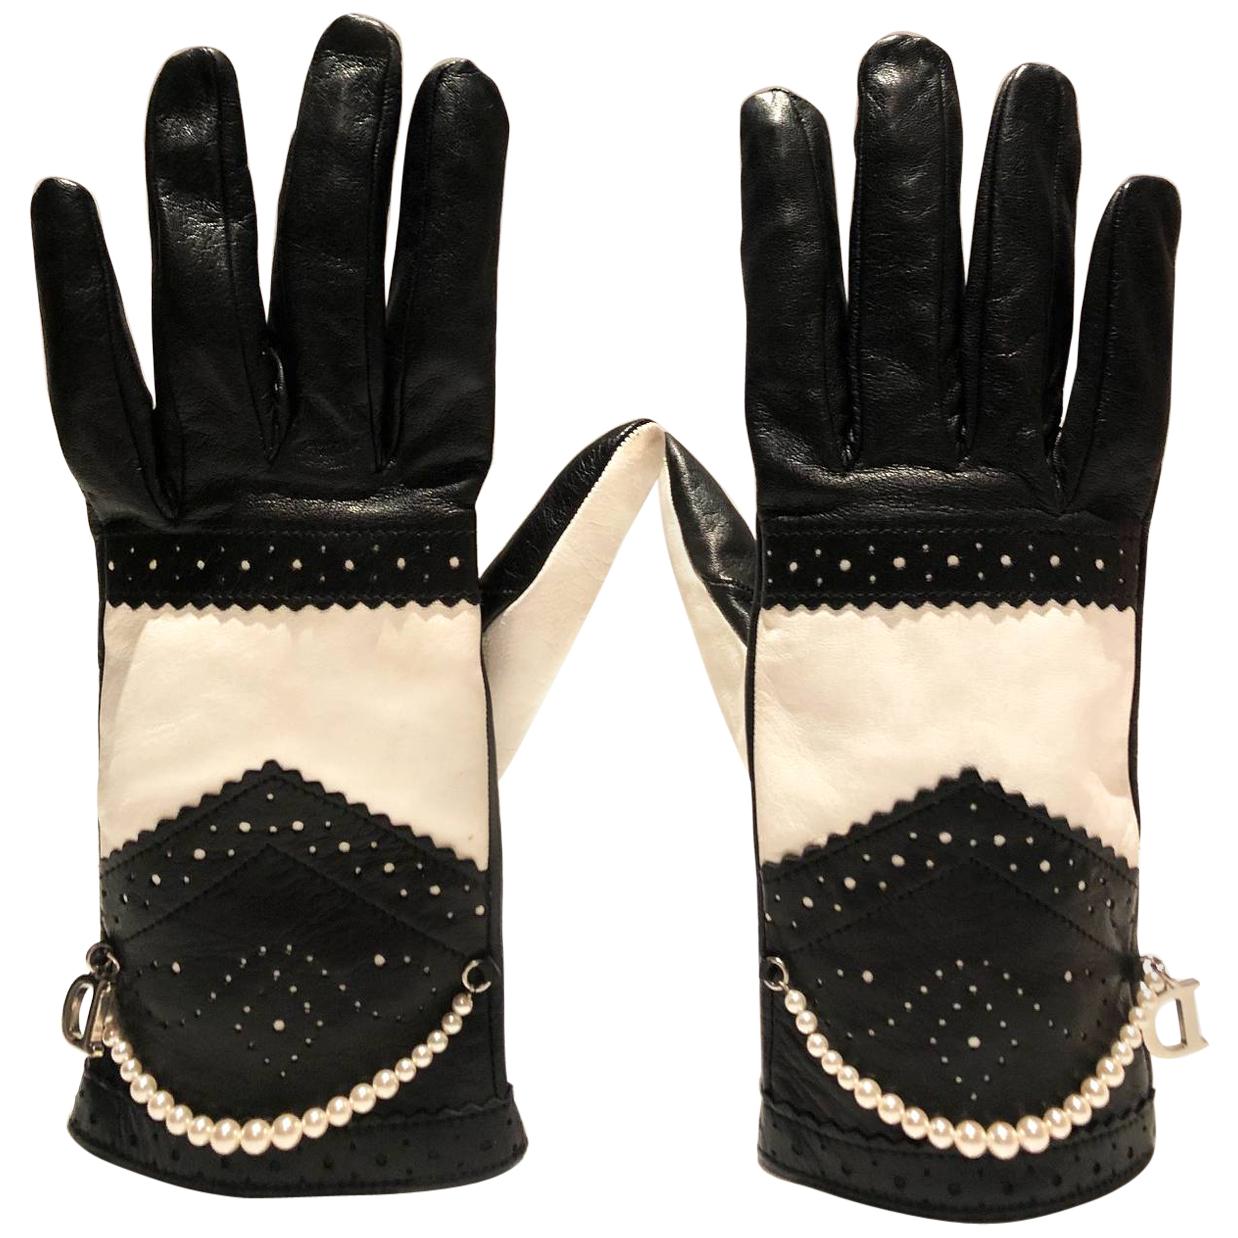 1990s CHRISTIAN DIOR BLACK WHITE LEATHER GLOVES WITH PEARLS